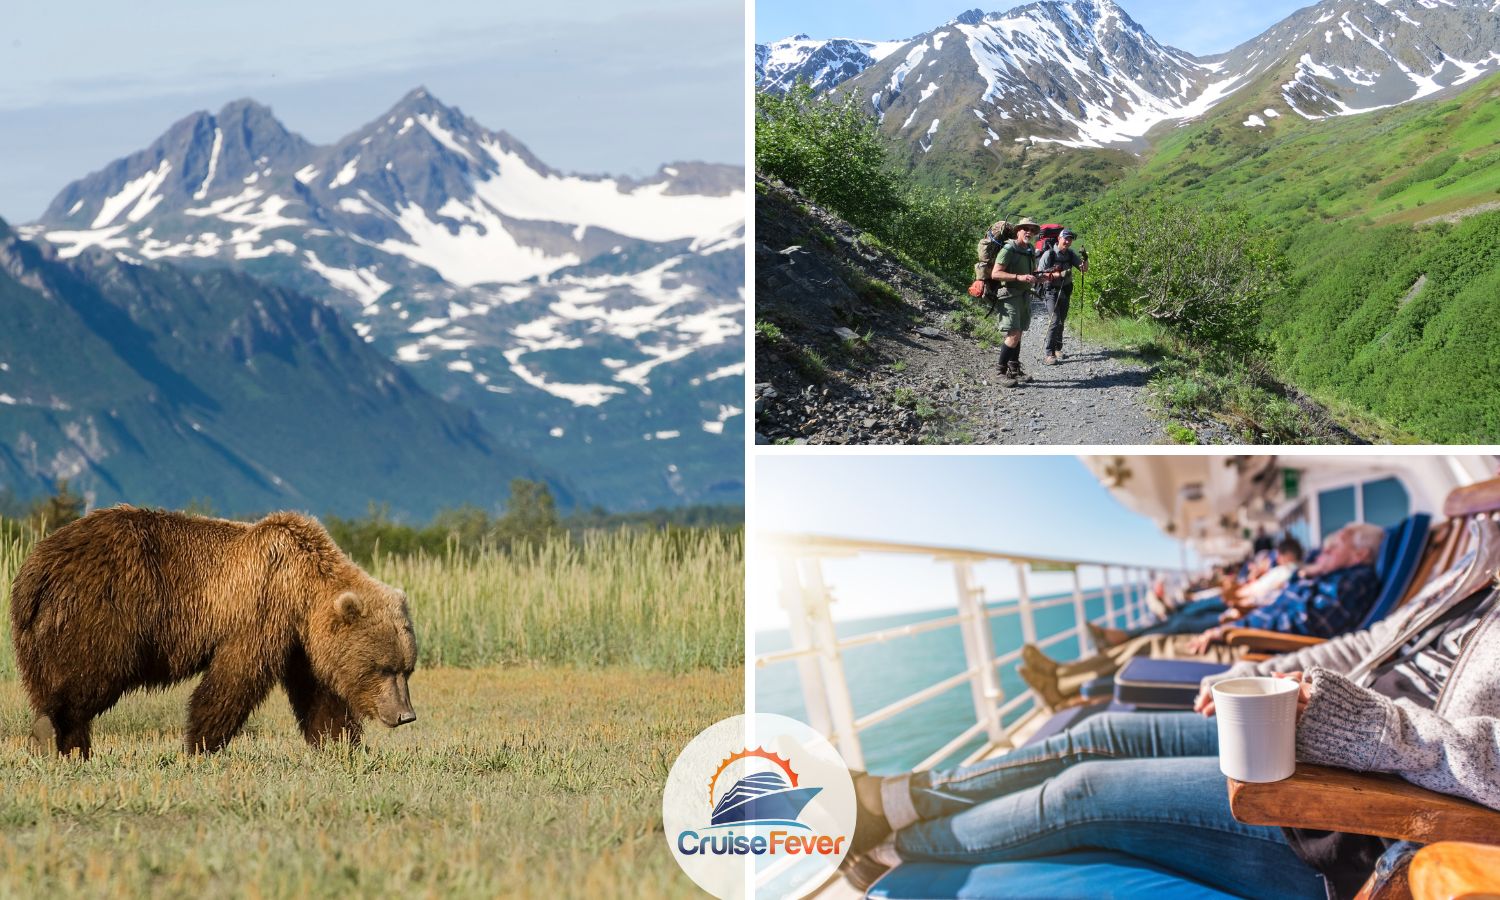 Grizzly bear and hiking trails in Alaska from cruise ship